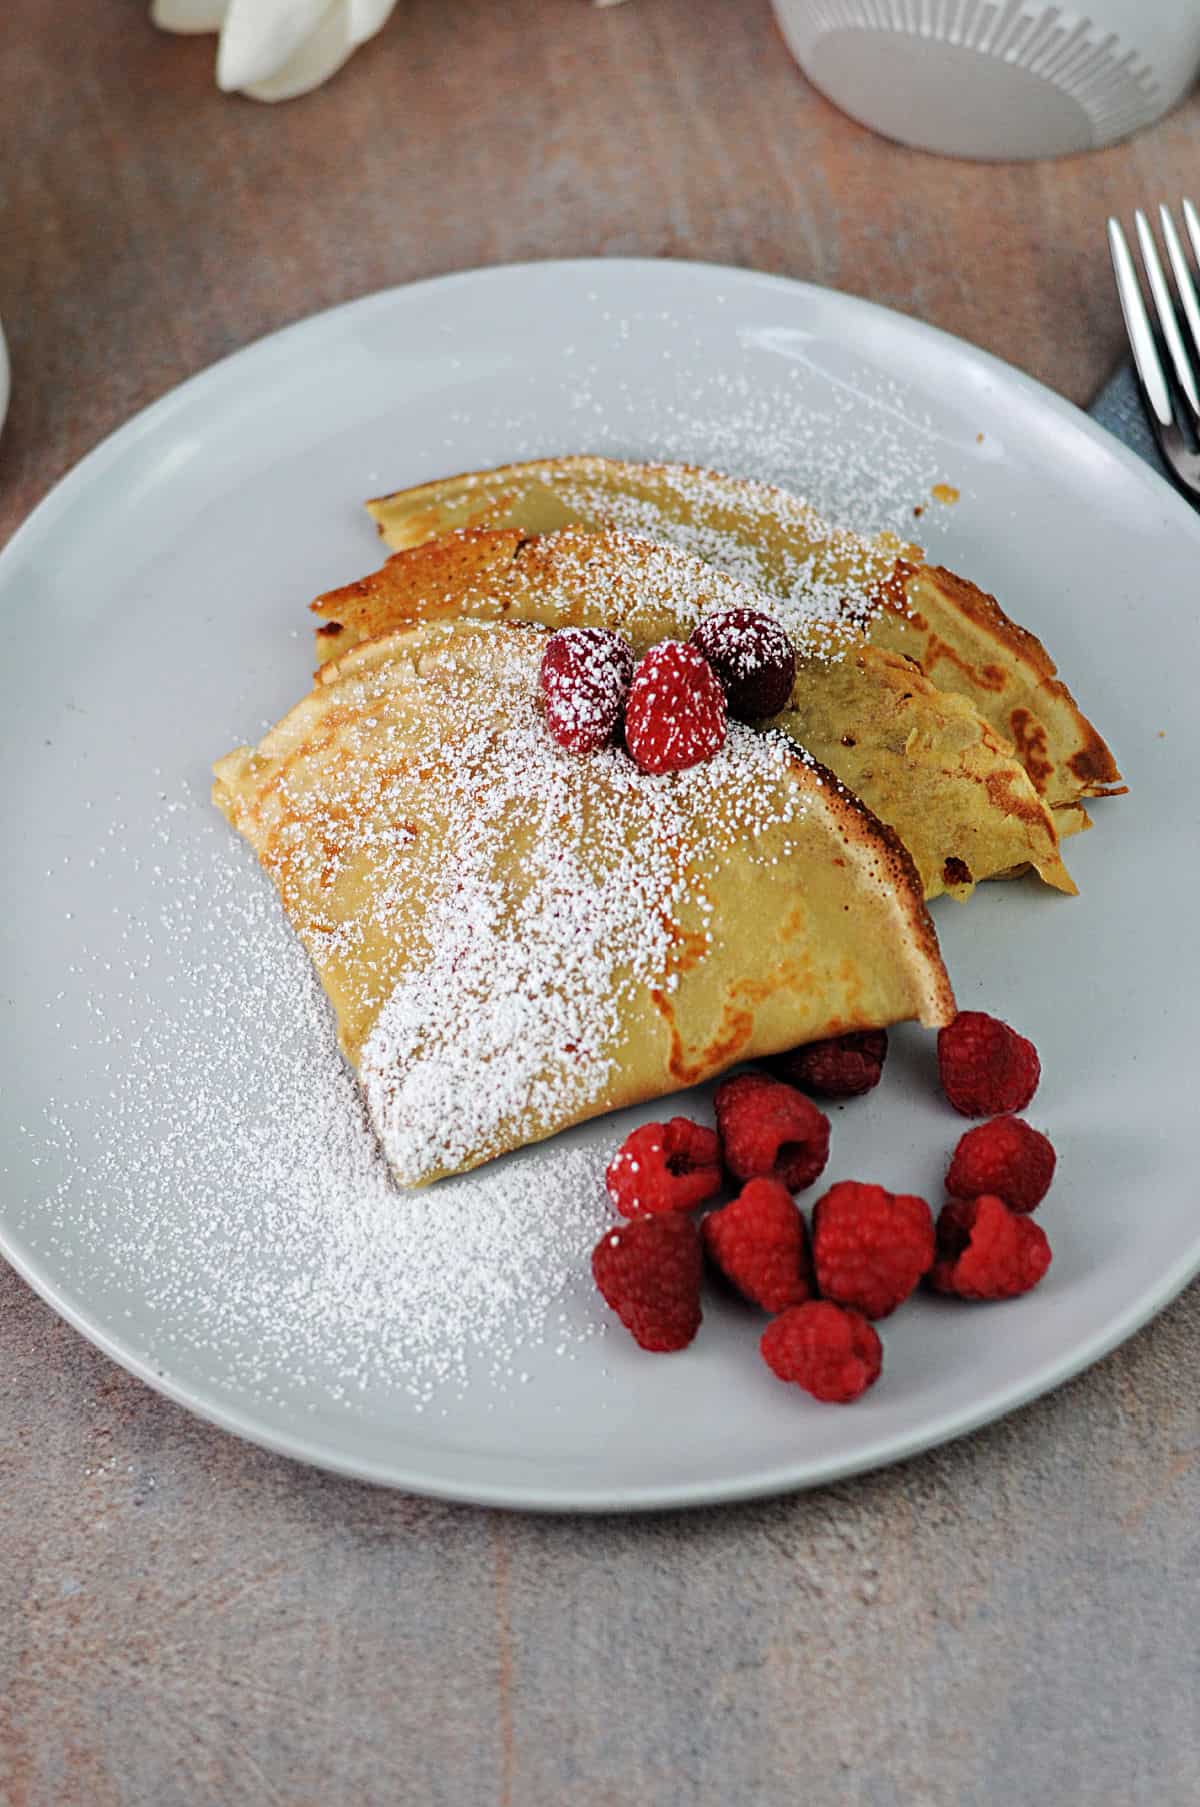 3 folded up oat milk crepes dusted with powdered sugar.